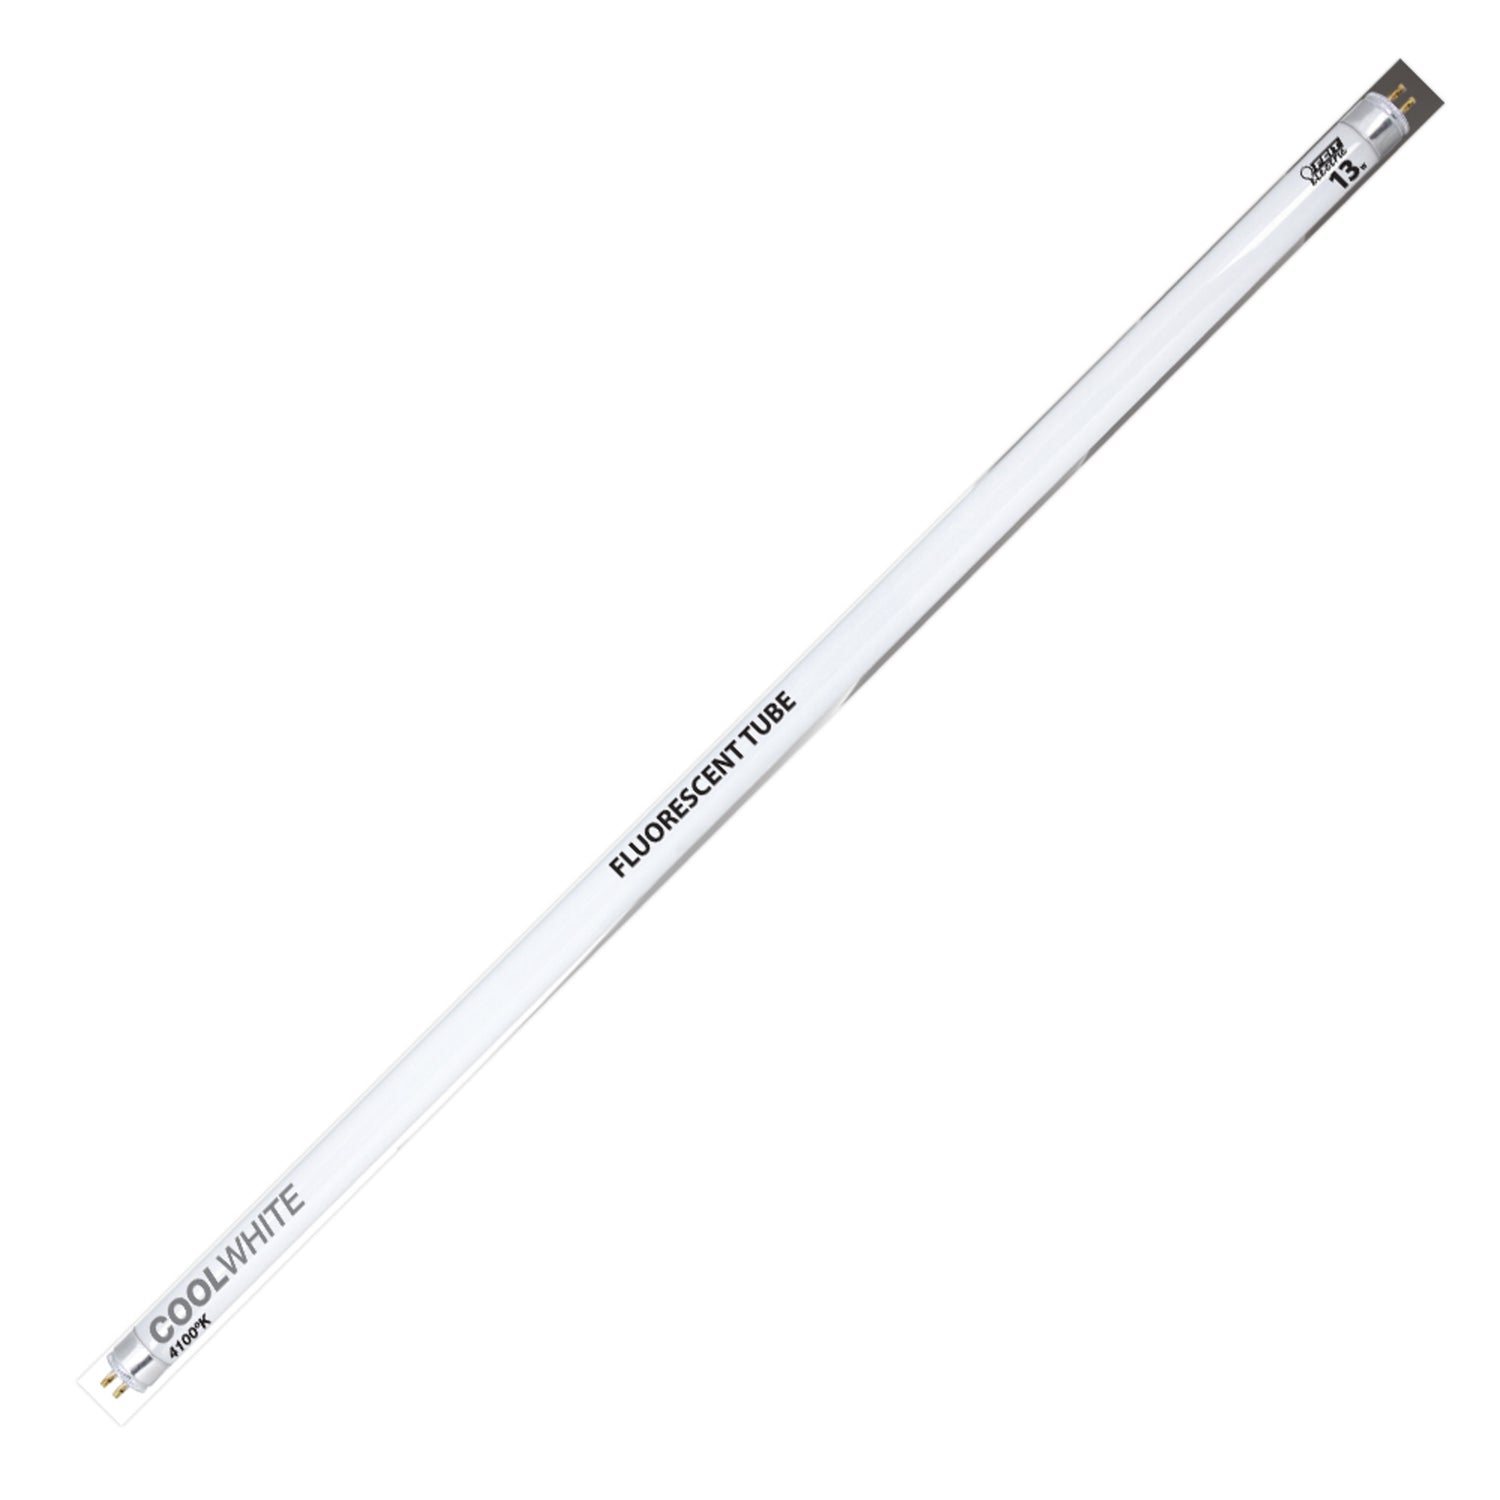 21 in. 13W Cool White White (4100K) G5 Base (T5 Replacement) Fluorescent Linear Light Tube